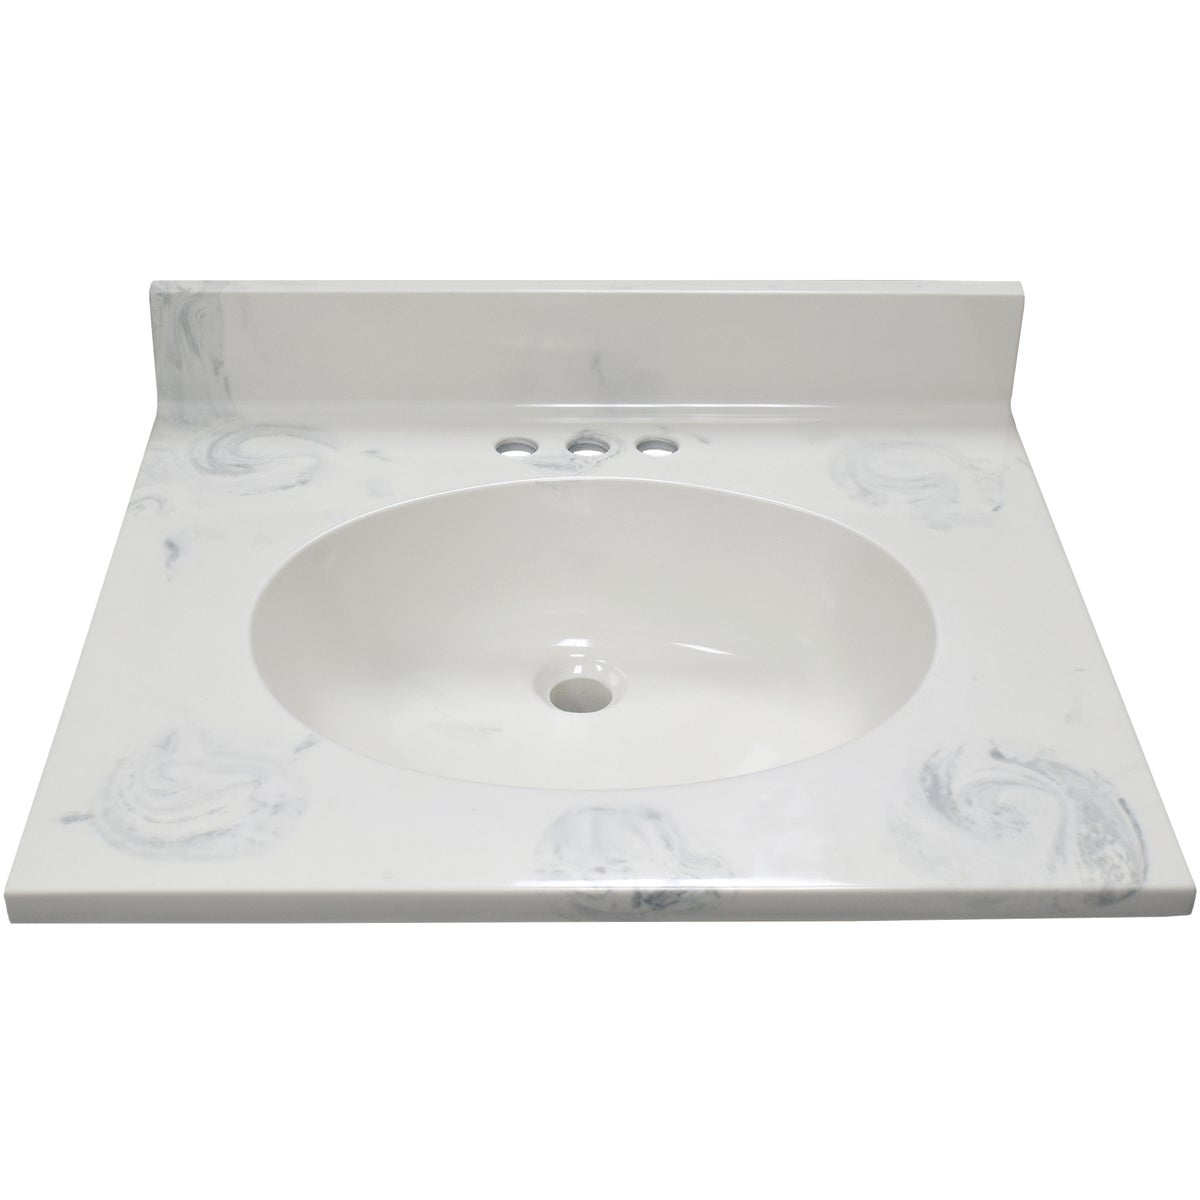 Modular Vanity Tops 25 In. W x 22 In. D Marbled Dove Gray Cultured Marble Flat Edge Single Sink Vanity Top with Oval Bowl